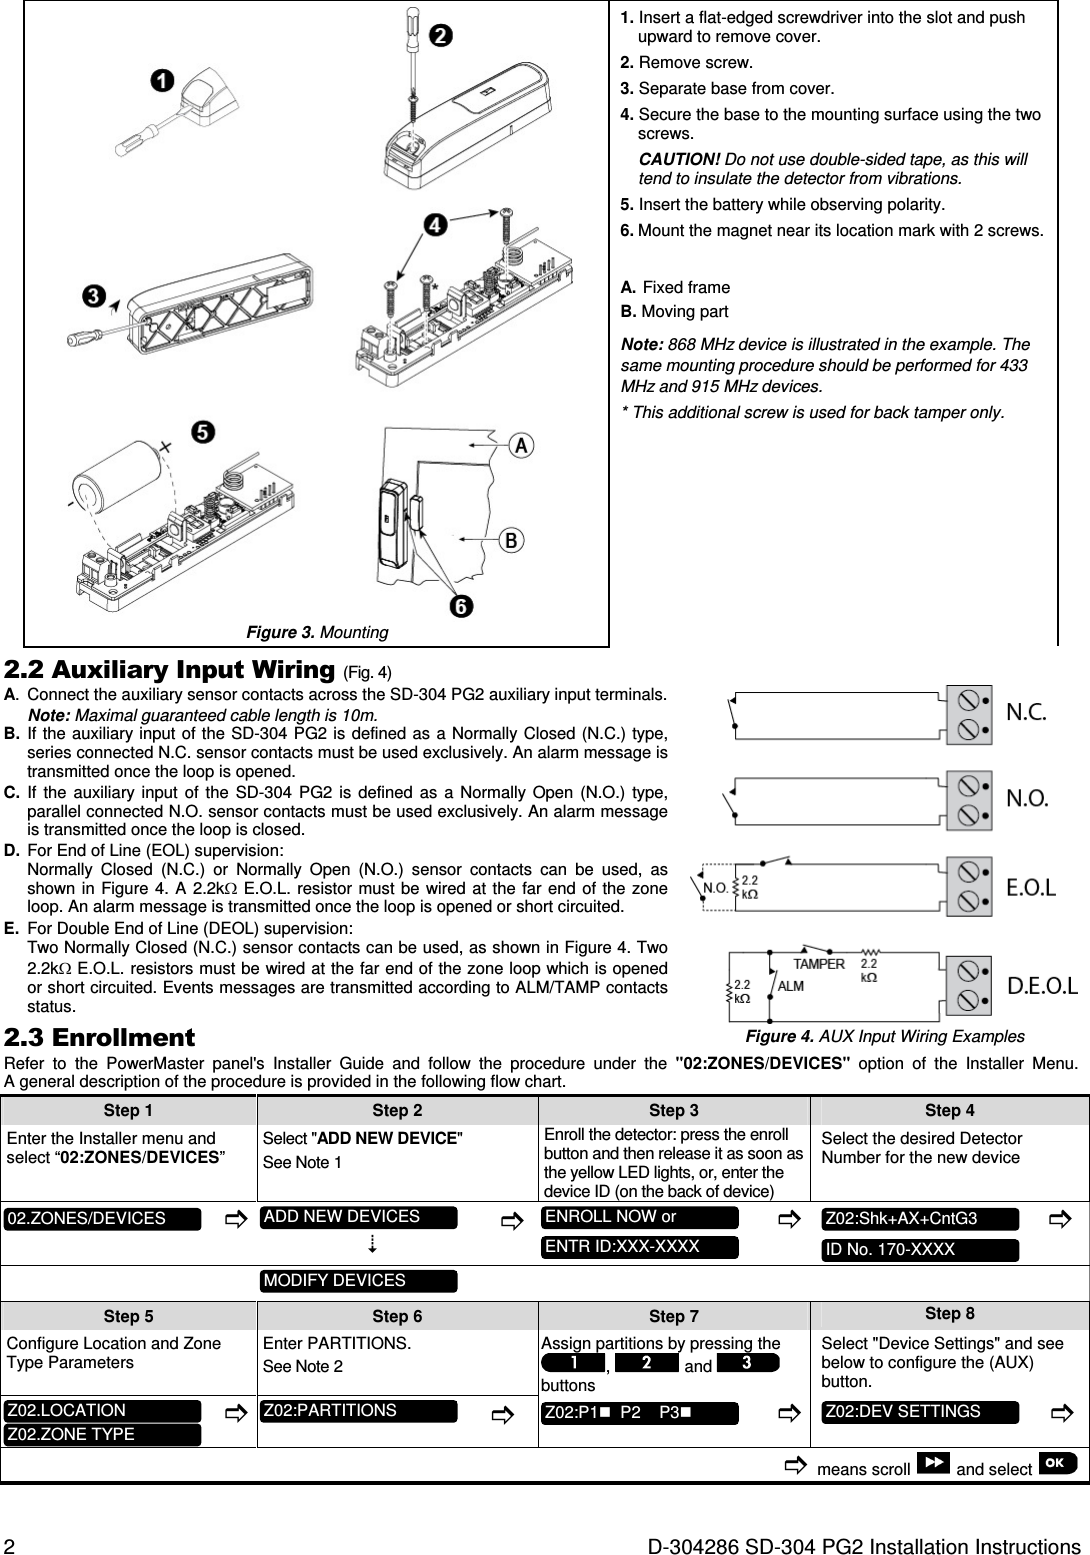 2  D-304286 SD-304 PG2 Installation Instructions  Figure 3. Mounting 1. Insert a flat-edged screwdriver into the slot and push upward to remove cover. 2. Remove screw. 3. Separate base from cover. 4. Secure the base to the mounting surface using the two screws. CAUTION! Do not use double-sided tape, as this will tend to insulate the detector from vibrations. 5. Insert the battery while observing polarity. 6. Mount the magnet near its location mark with 2 screws. A.  Fixed frame B. Moving part Note: 868 MHz device is illustrated in the example. The same mounting procedure should be performed for 433 MHz and 915 MHz devices. * This additional screw is used for back tamper only. 2.2 Auxiliary Input Wiring (Fig. 4) A.  Connect the auxiliary sensor contacts across the SD-304 PG2 auxiliary input terminals. Note: Maximal guaranteed cable length is 10m.  B.  If the  auxiliary input of the SD-304 PG2 is defined as a Normally Closed (N.C.) type, series connected N.C. sensor contacts must be used exclusively. An alarm message is transmitted once the loop is opened. C.  If  the  auxiliary  input  of  the  SD-304  PG2  is  defined  as  a  Normally Open  (N.O.)  type, parallel connected N.O. sensor contacts must be used exclusively. An alarm message is transmitted once the loop is closed. D.  For End of Line (EOL) supervision: Normally  Closed  (N.C.)  or  Normally  Open  (N.O.)  sensor  contacts  can  be  used,  as shown in  Figure  4. A  2.2kΩ  E.O.L. resistor  must  be wired  at the  far  end of the  zone loop. An alarm message is transmitted once the loop is opened or short circuited. E.  For Double End of Line (DEOL) supervision: Two Normally Closed (N.C.) sensor contacts can be used, as shown in Figure 4. Two 2.2kΩ E.O.L. resistors must be wired at the far end of the zone loop which is opened or short circuited. Events messages are transmitted according to ALM/TAMP contacts status. 2.3 Enrollment  Figure 4. AUX Input Wiring Examples Refer  to  the  PowerMaster  panel&apos;s  Installer  Guide  and  follow  the  procedure  under  the  &quot;02:ZONES/DEVICES&quot;  option  of  the  Installer  Menu. A general description of the procedure is provided in the following flow chart. Step 1 Step 2 Step 3 Step 4   Enter the Installer menu and select “02:ZONES/DEVICES” Select &quot;ADD NEW DEVICE&quot;  See Note 1 Enroll the detector: press the enroll button and then release it as soon as the yellow LED lights, or, enter the device ID (on the back of device) Select the desired Detector Number for the new device                  Step 5 Step 6 Step 7 Step 8 Configure Location and Zone Type Parameters Enter PARTITIONS. See Note 2 Assign partitions by pressing the ,   and   buttons Select &quot;Device Settings&quot; and see below to configure the (AUX) button.               means scroll   and select   Z02:DEV SETTINGS  Z02:P1  P2    P3  Z02:PARTITIONS  Z02.ZONE TYPE  Z02.LOCATION  ID No. 170-XXXX  Z02:Shk+AX+CntG3  ENTR ID:XXX-XXXX  ENROLL NOW or  MODIFY DEVICES  ADD NEW DEVICES  02.ZONES/DEVICES  